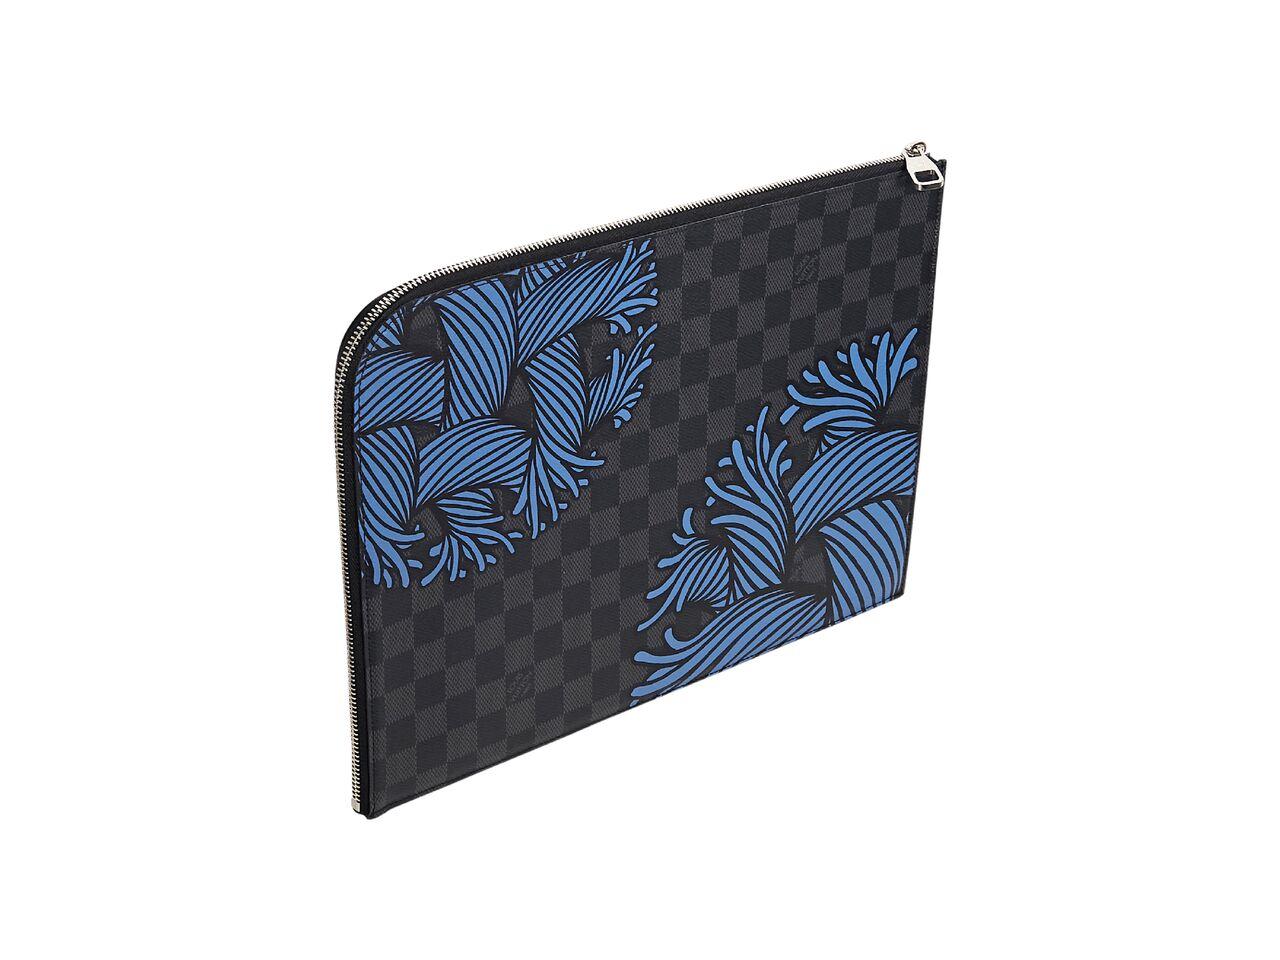 Product details:  Dark grey Icare damier coated canvas document pouch by Louis Vuitton.  Blue printed design.  Top zip closure.  Lined interior with inner slide pocket.  Silvertone hardware.  13